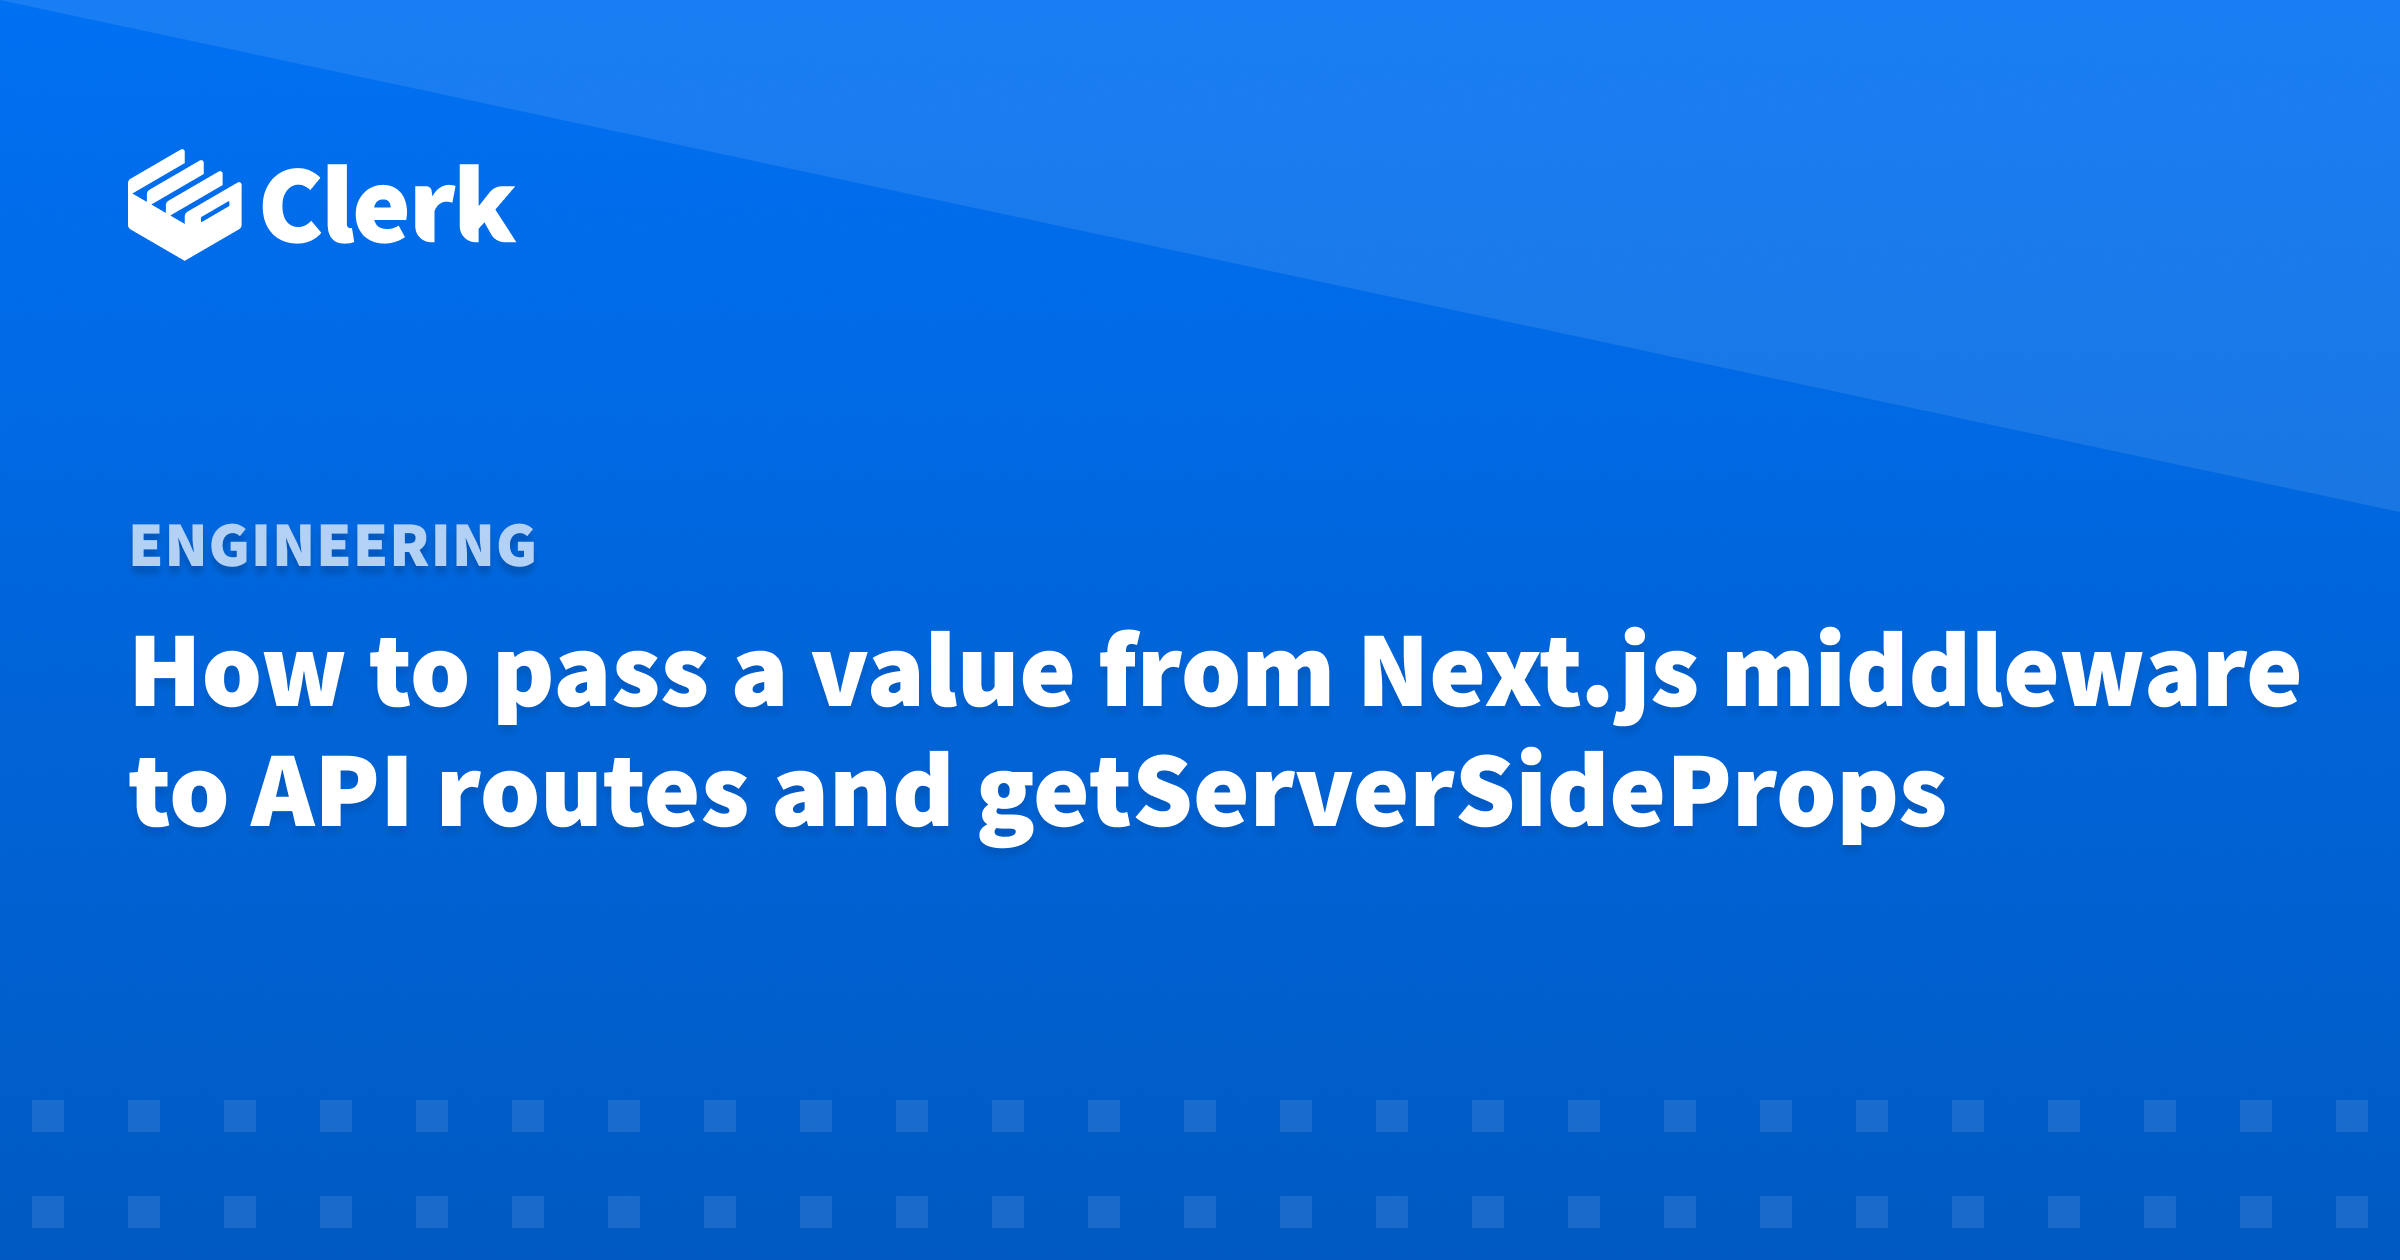 How to pass a value from Next.js middleware to API routes and getServerSideProps